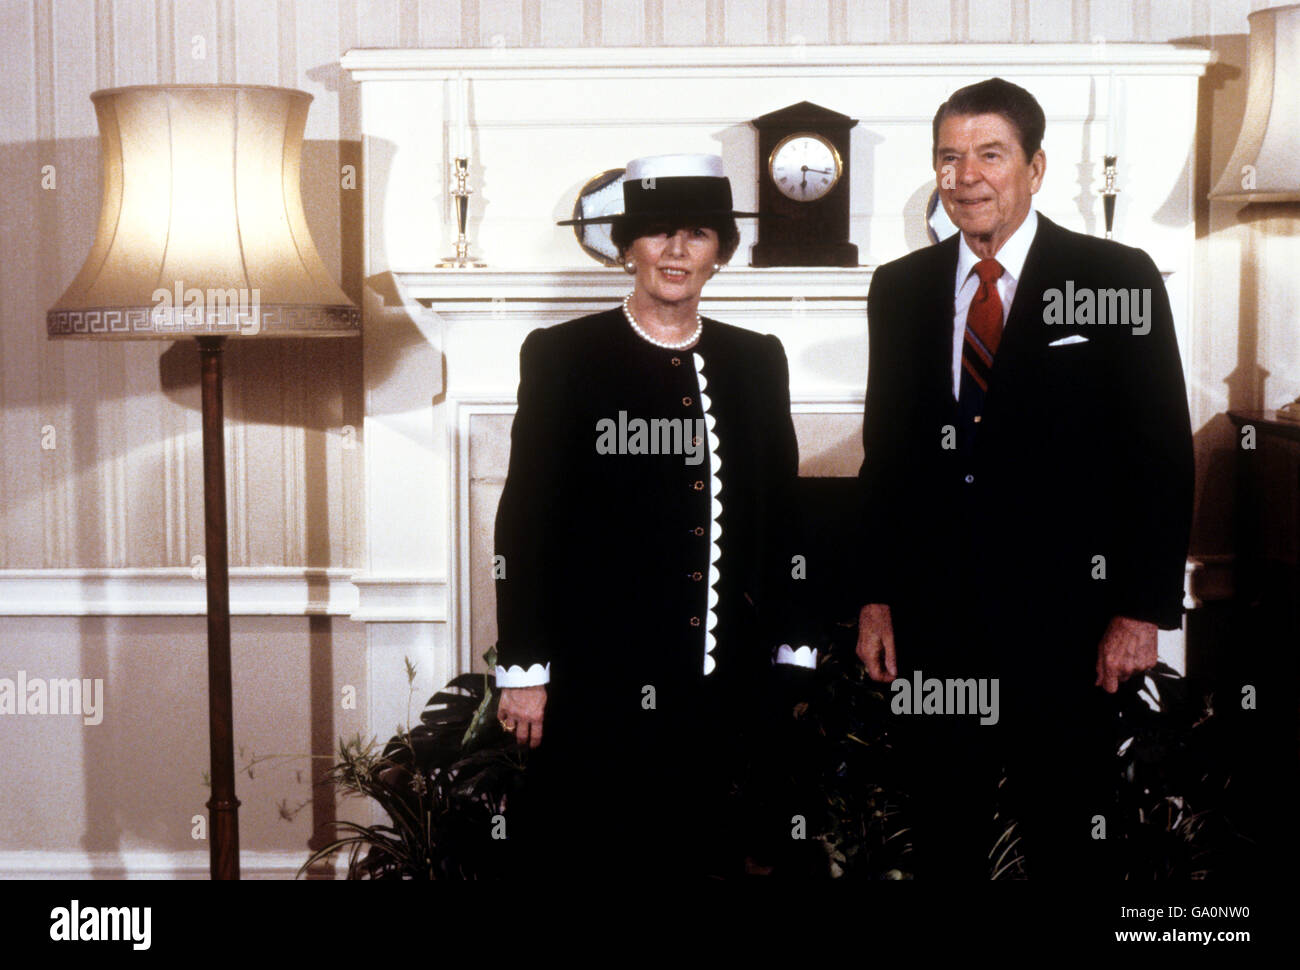 Following his historic Moscow summit with Soviet leader Mikhail Gorbachev, American President Ronald Reagan came to London to see Prime Minister Margaret Thatcher. Stock Photo